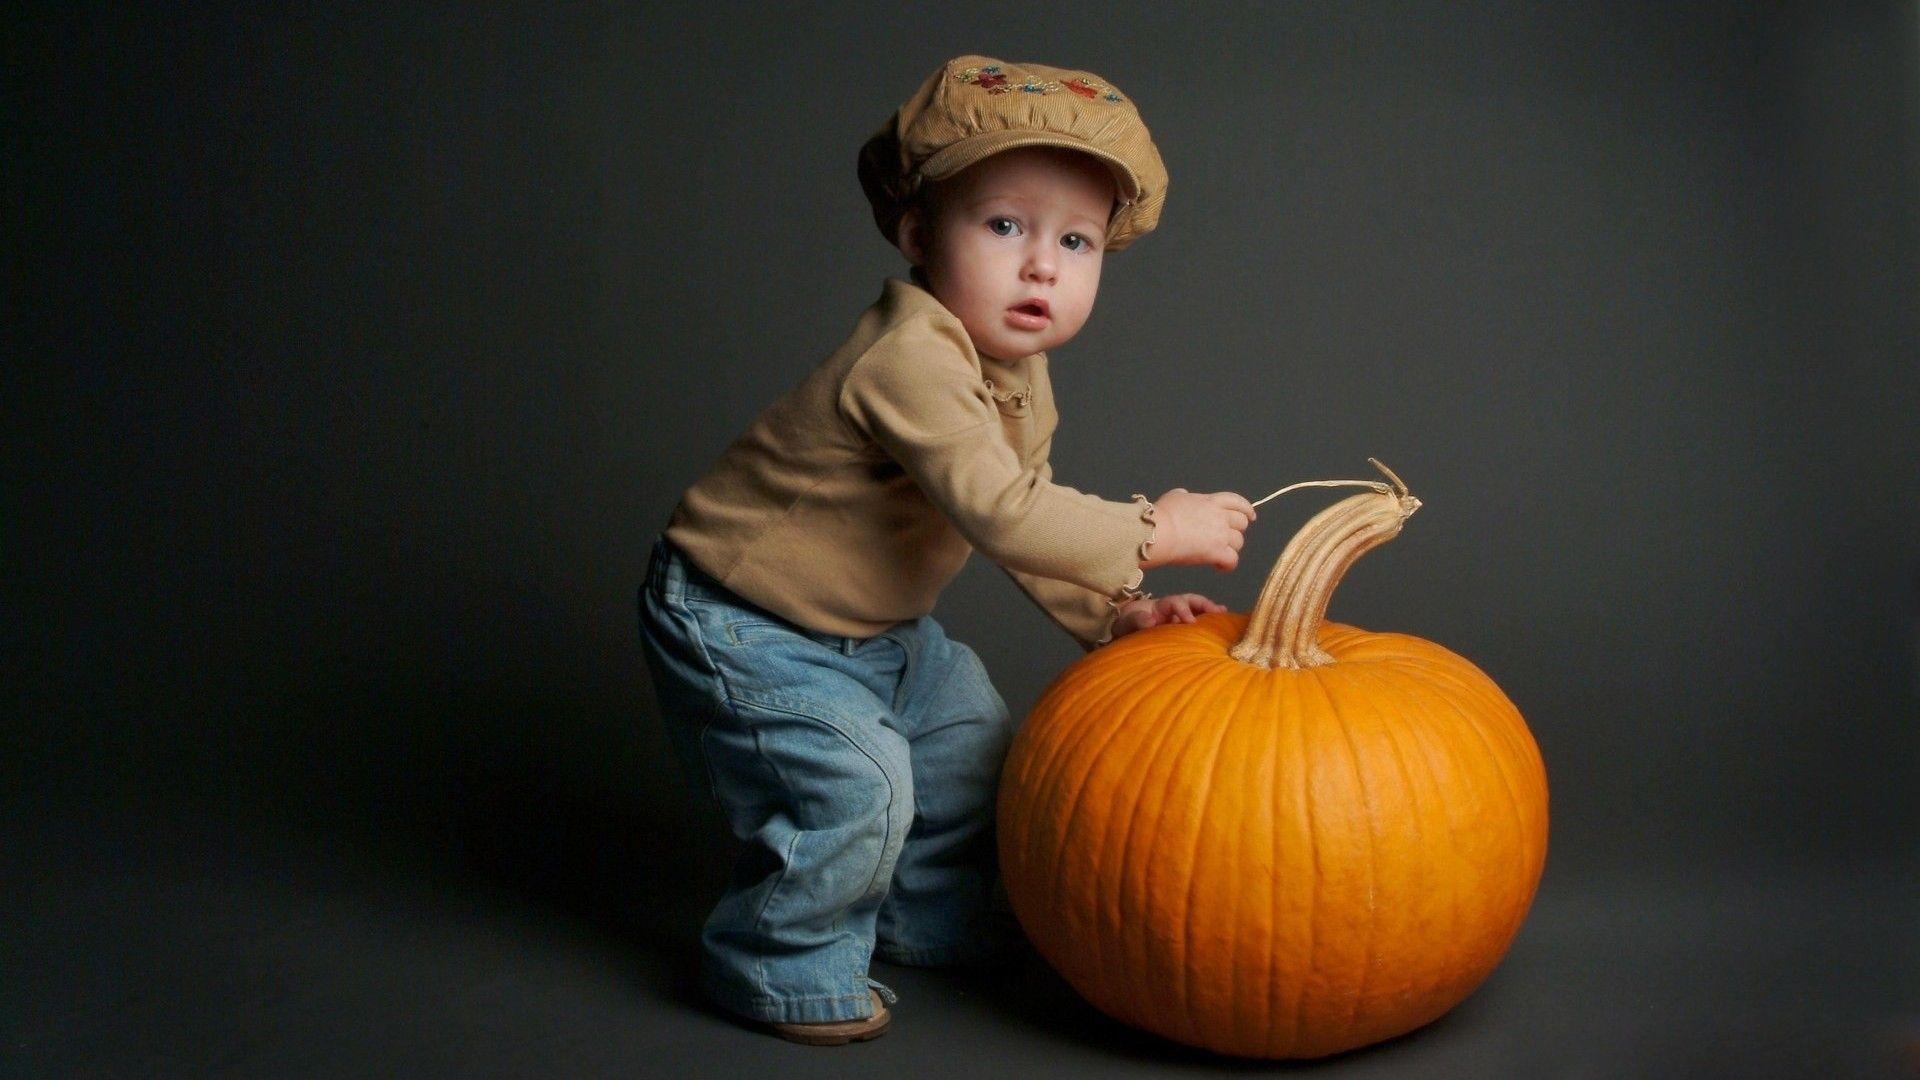 Wallpaper.wiki Image The Boy With Pumpkin PIC WPD0011353